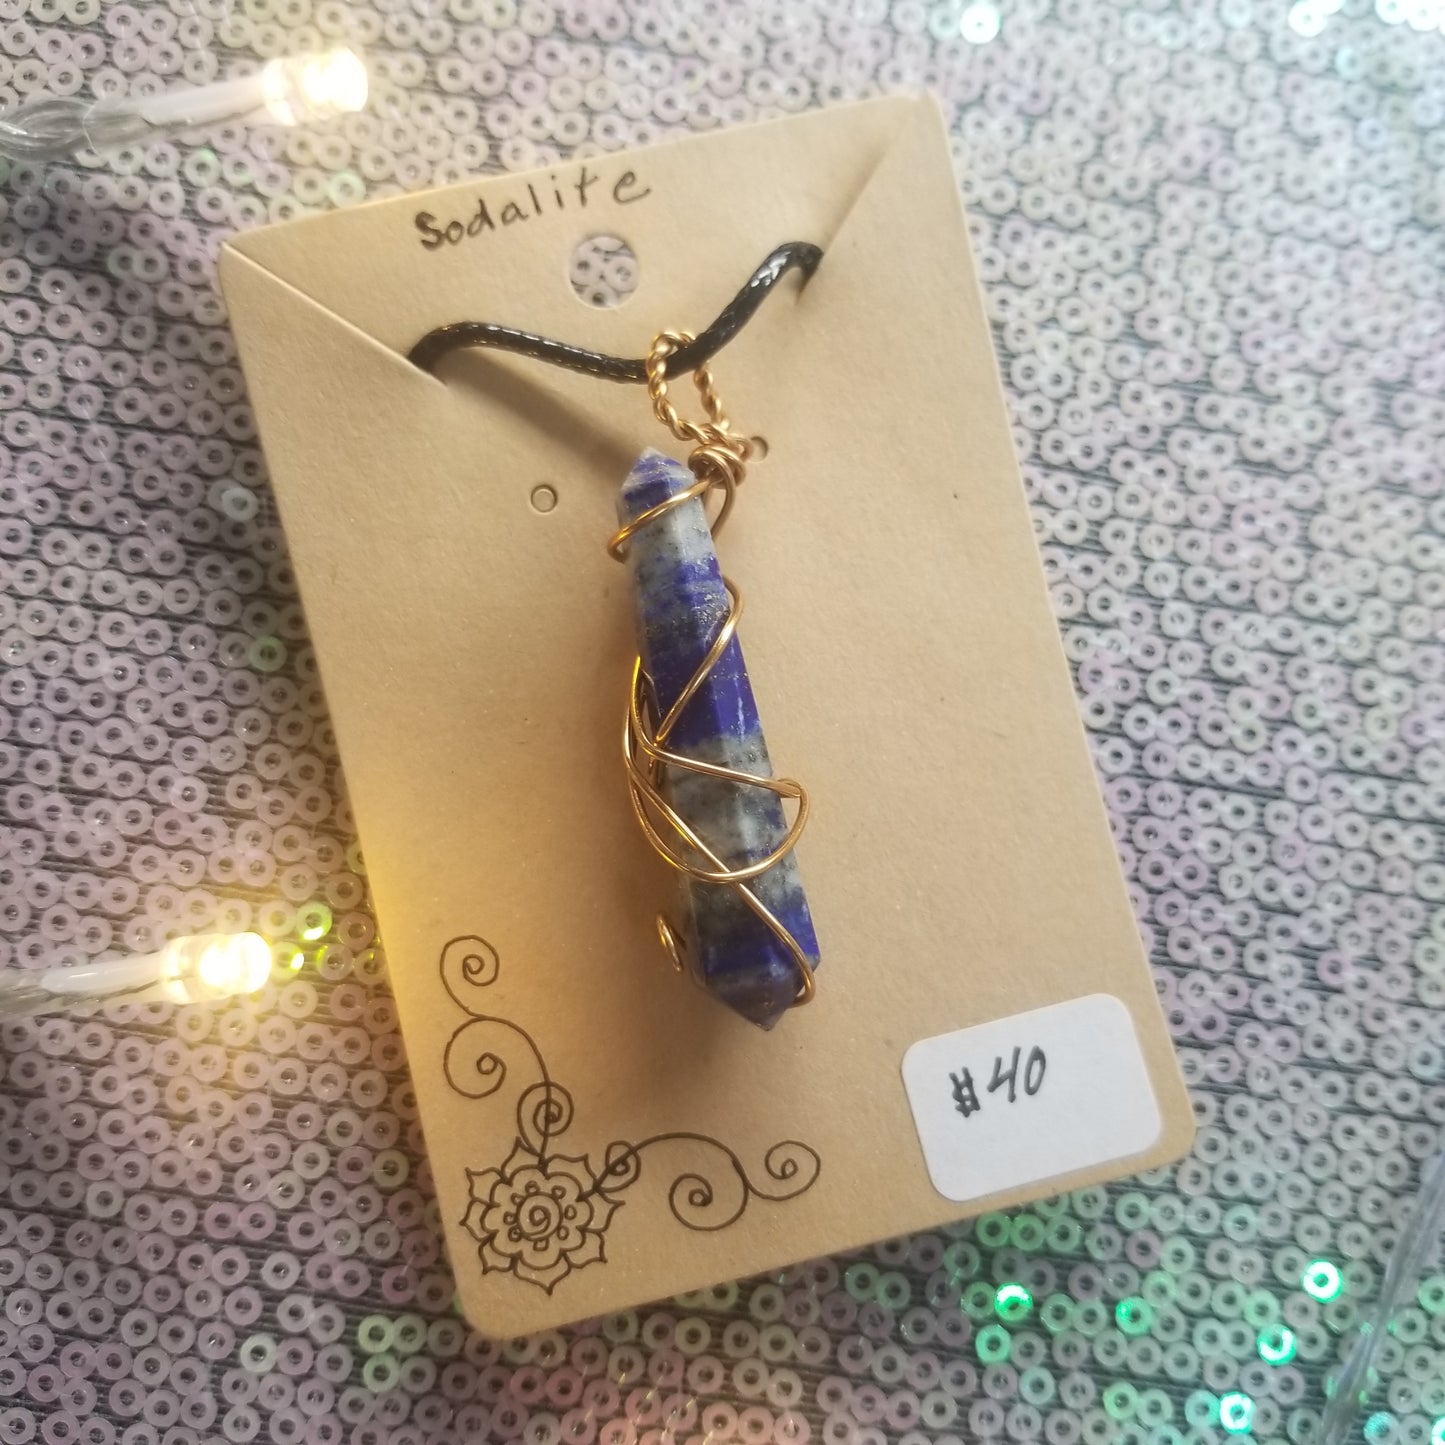 Sodalite Handwrapped Necklace